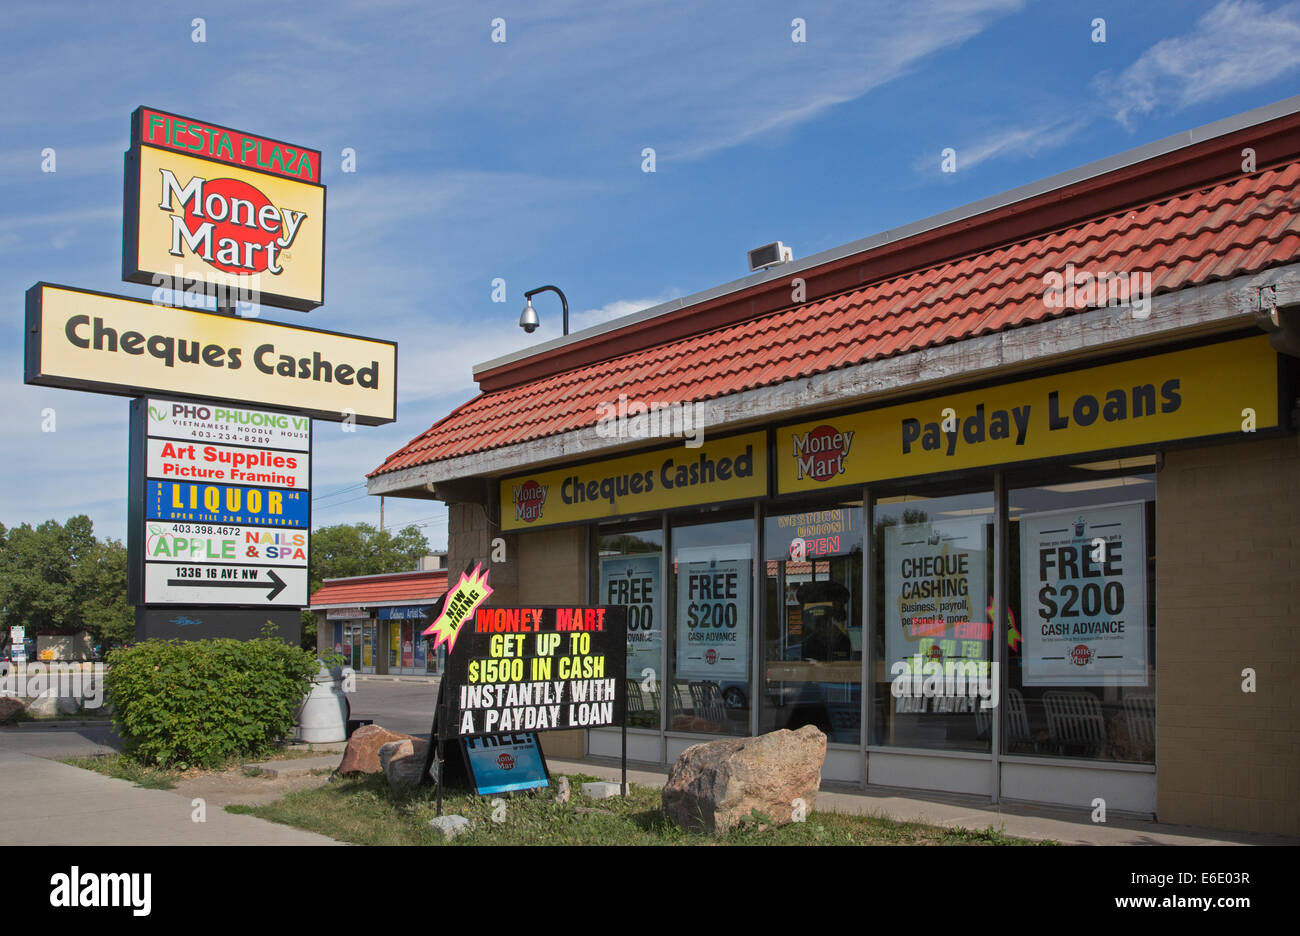 Money Mart cheque cashing and payday loans business in strip mall, Calgary, Alberta, Canada Stock Photo